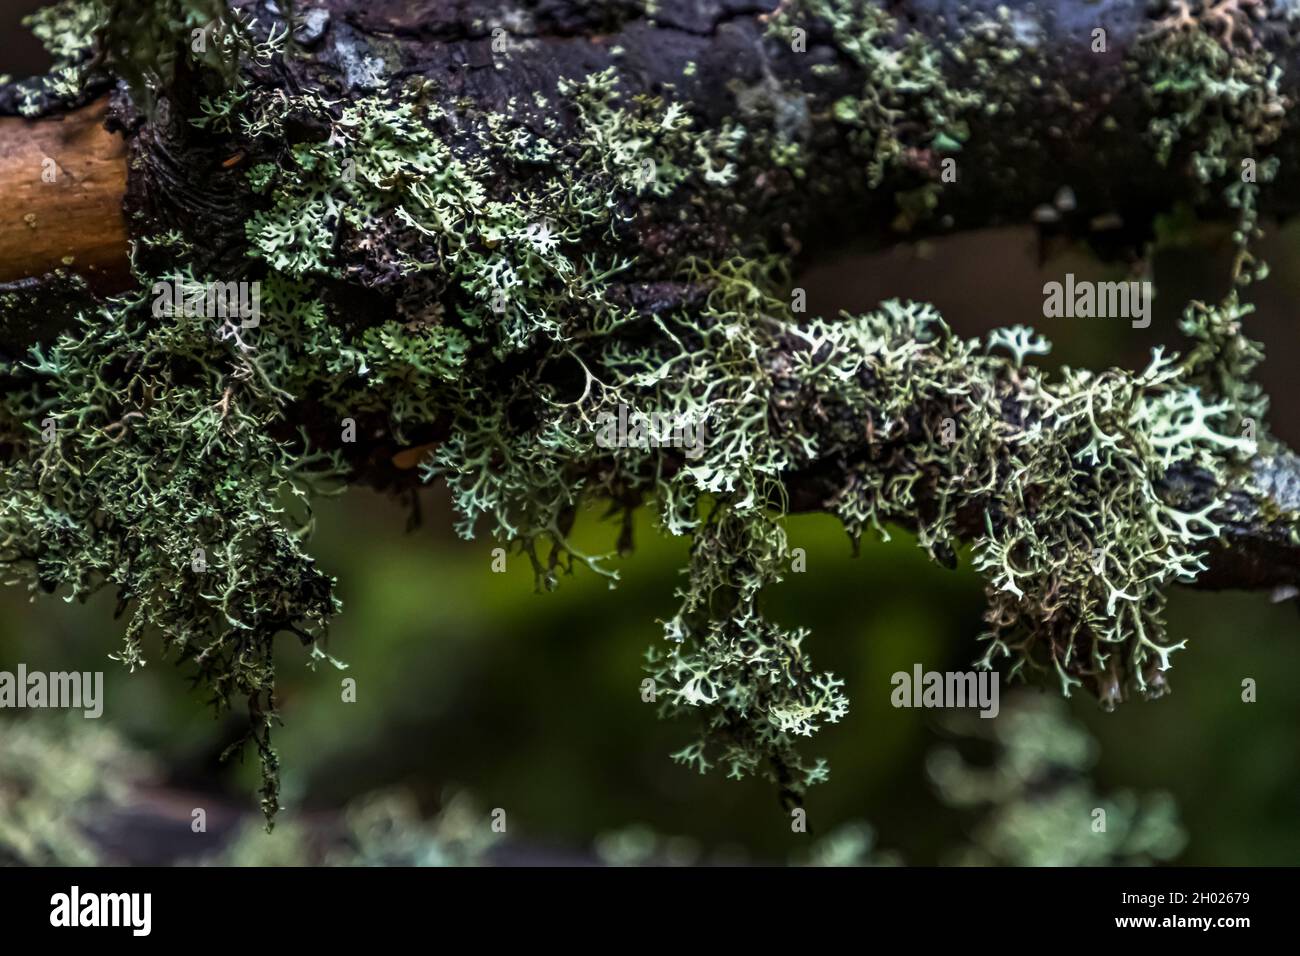 Dead wood overgrown with lichen Stock Photo